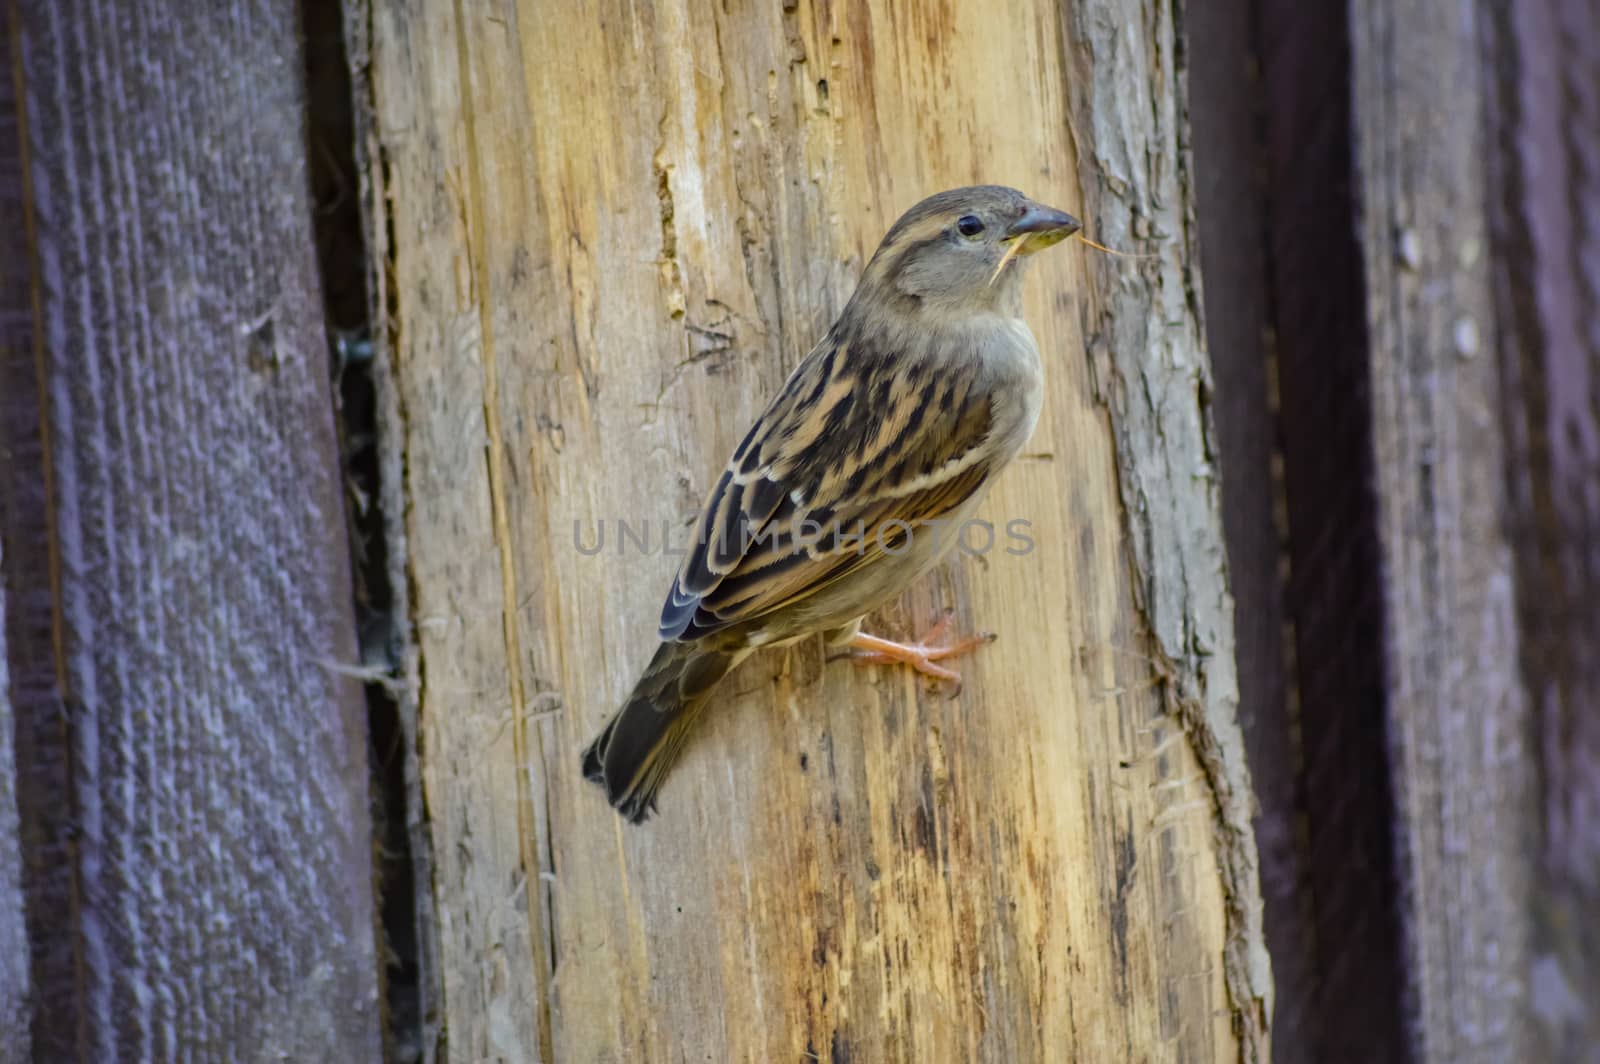 Sparrow posed on a wooden hut in a park in France